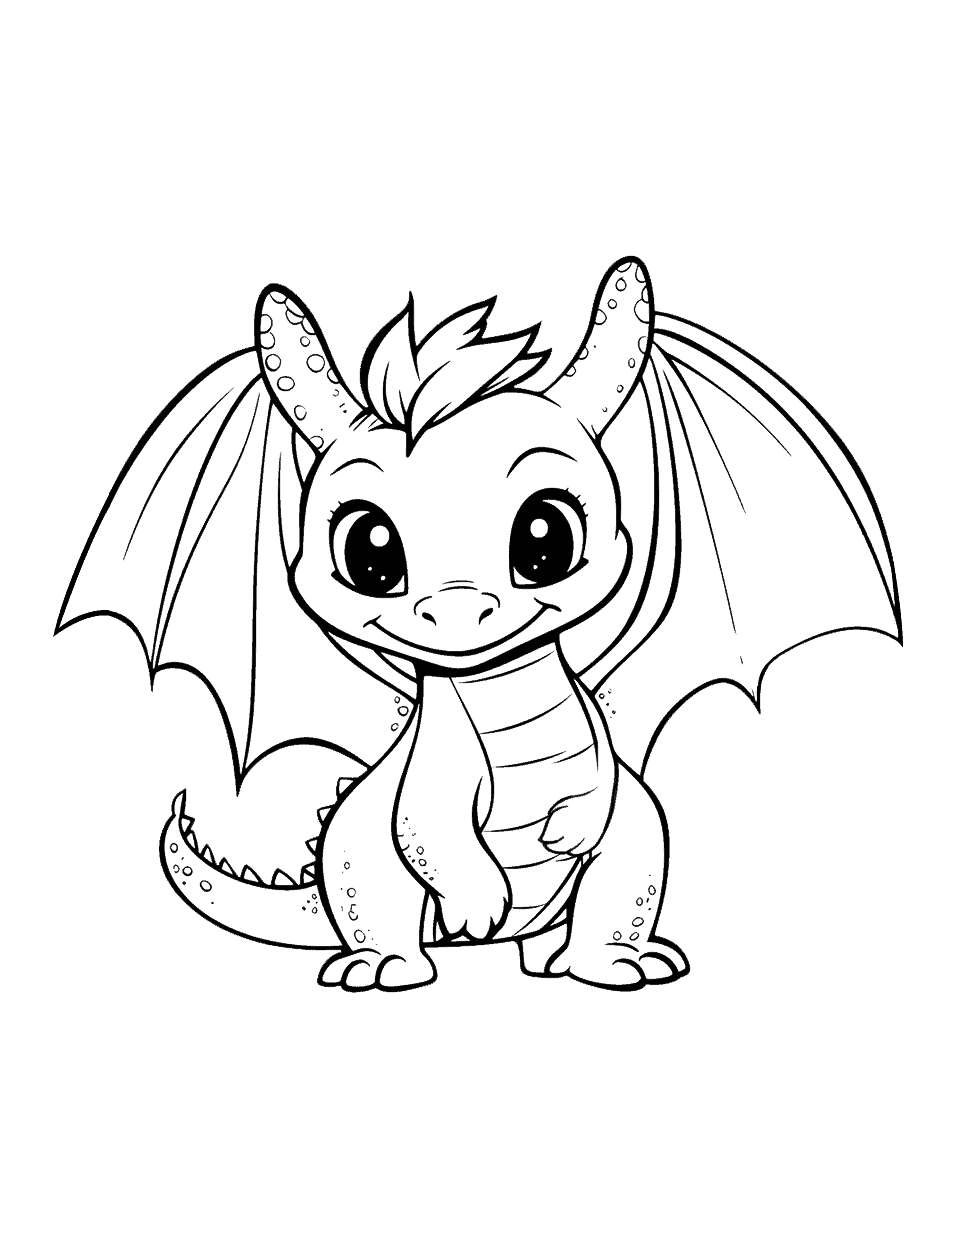 Kawaii Toothless Dragon Coloring Page - A kawaii-style Toothless, the Night Fury dragon, with big, sparkly eyes.